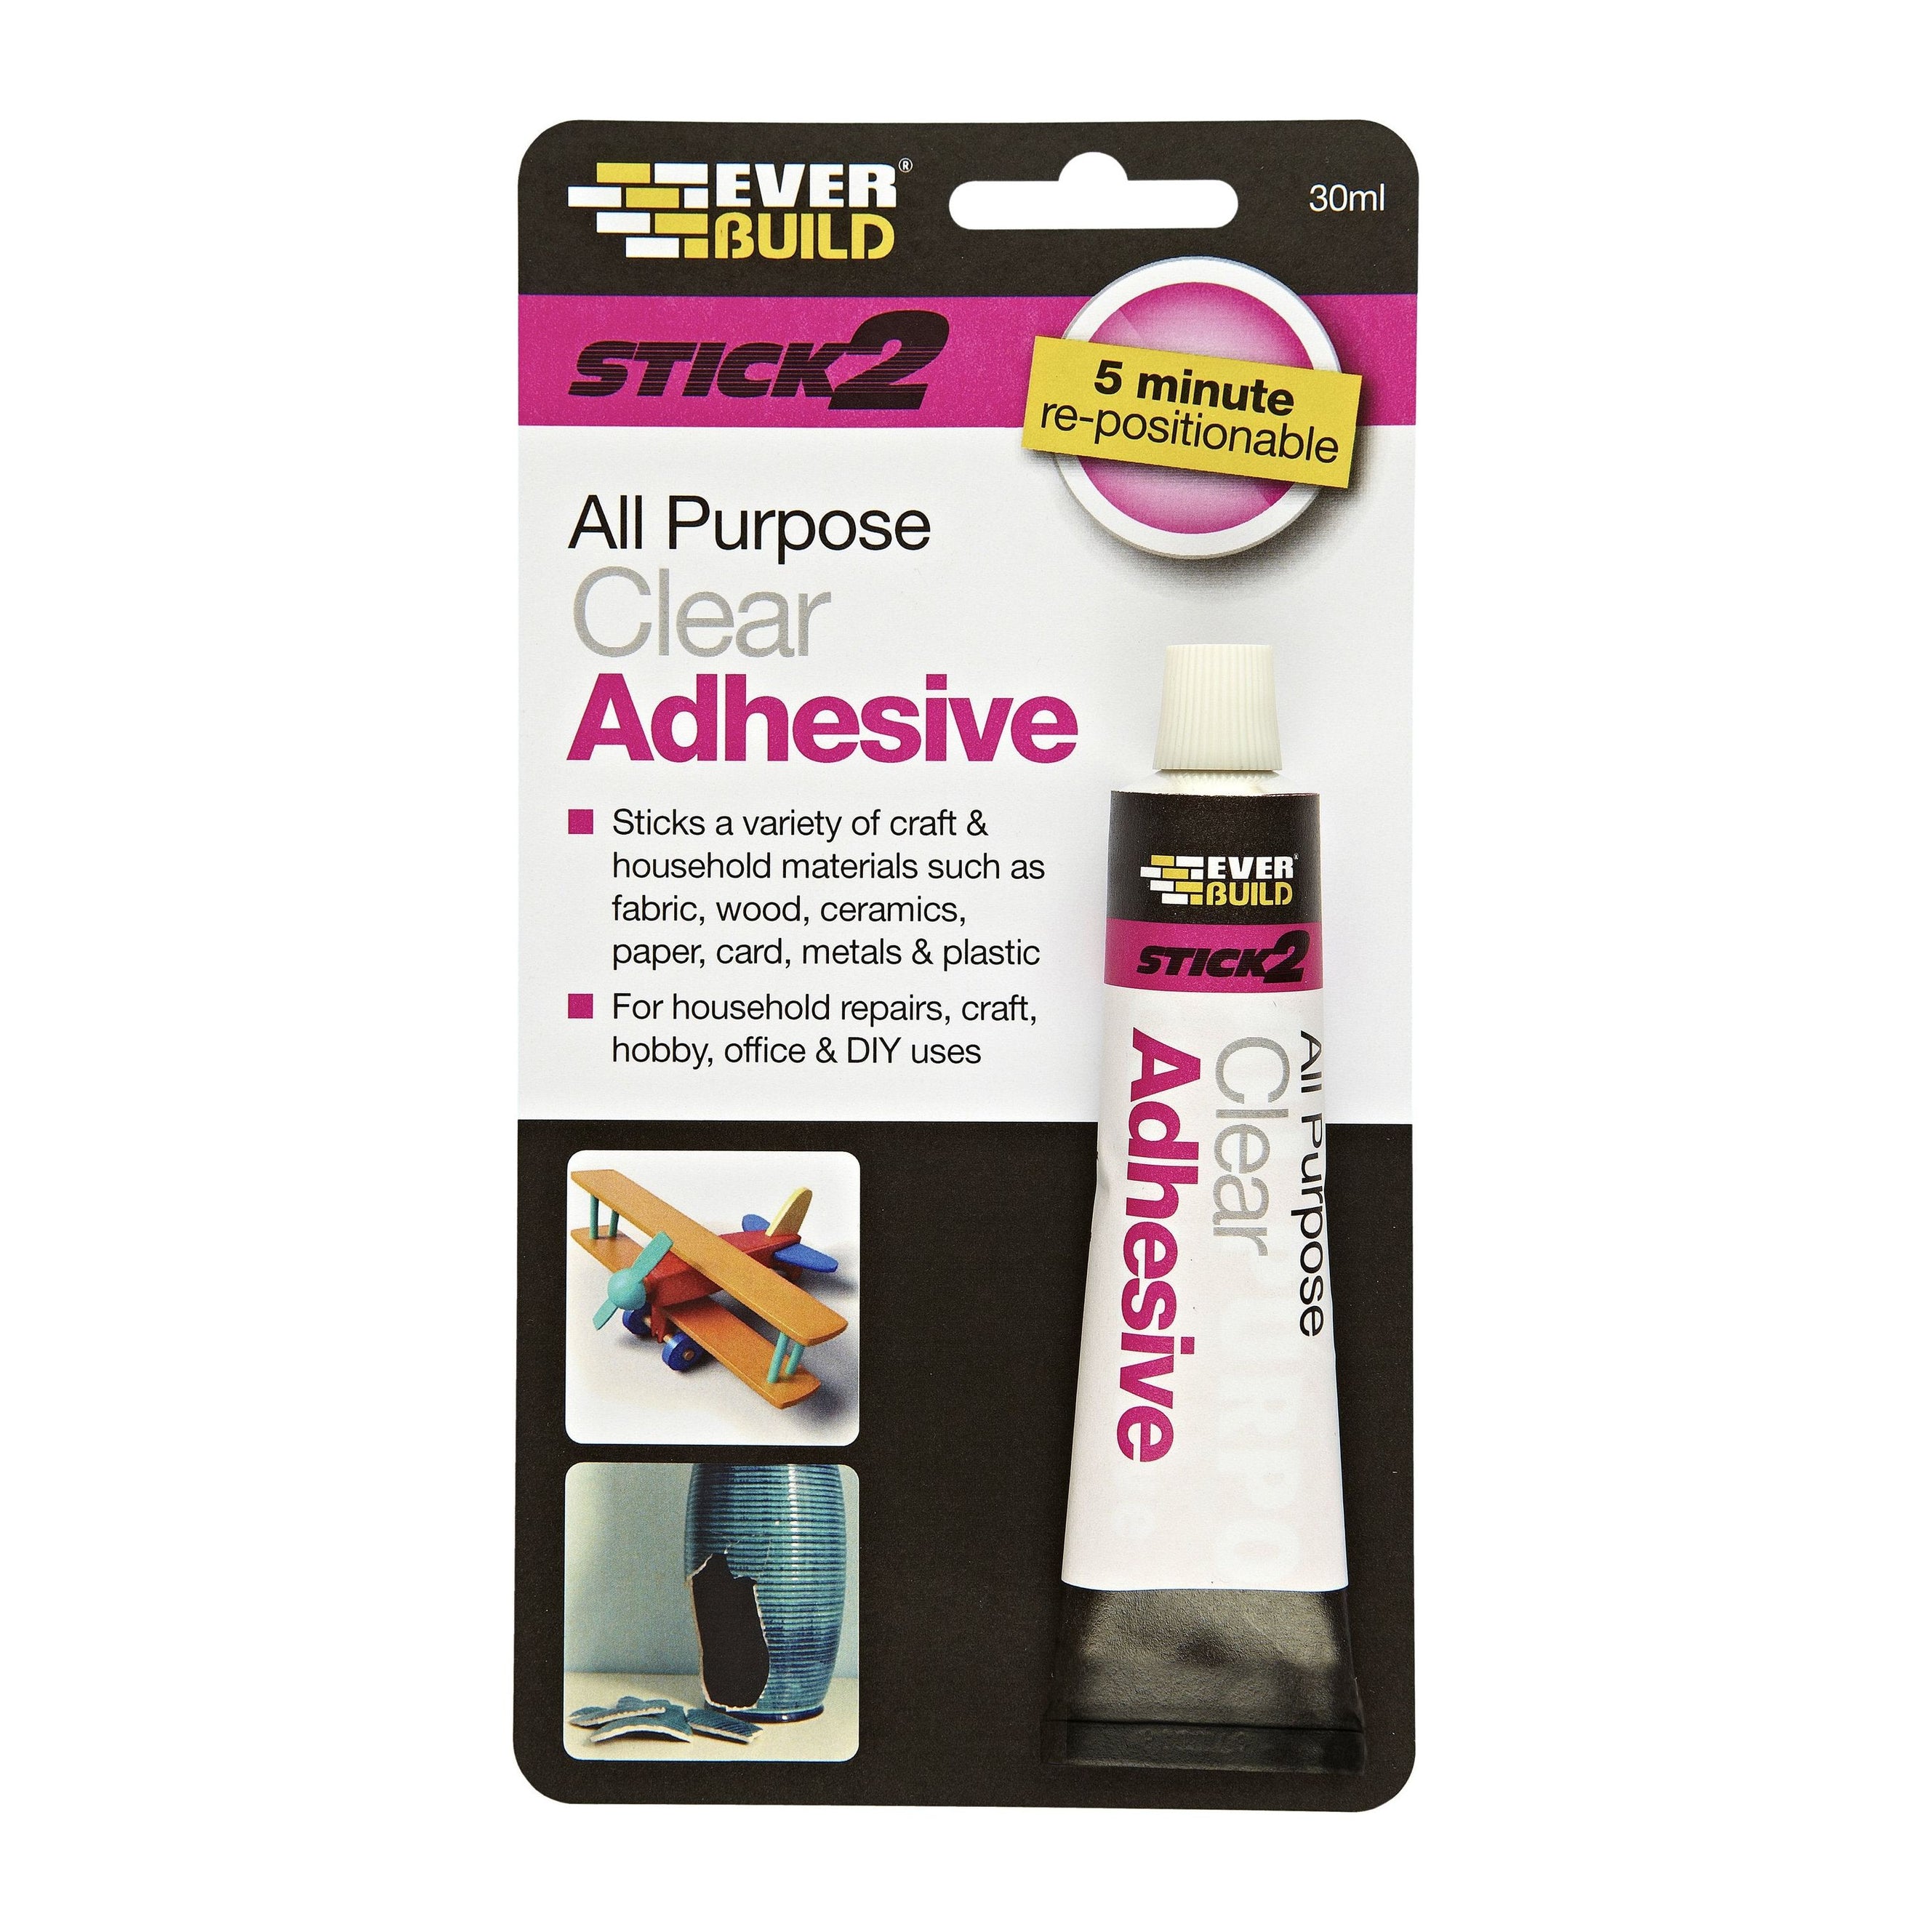 Everbuild Clear Adhesive 30ml Stick - 2